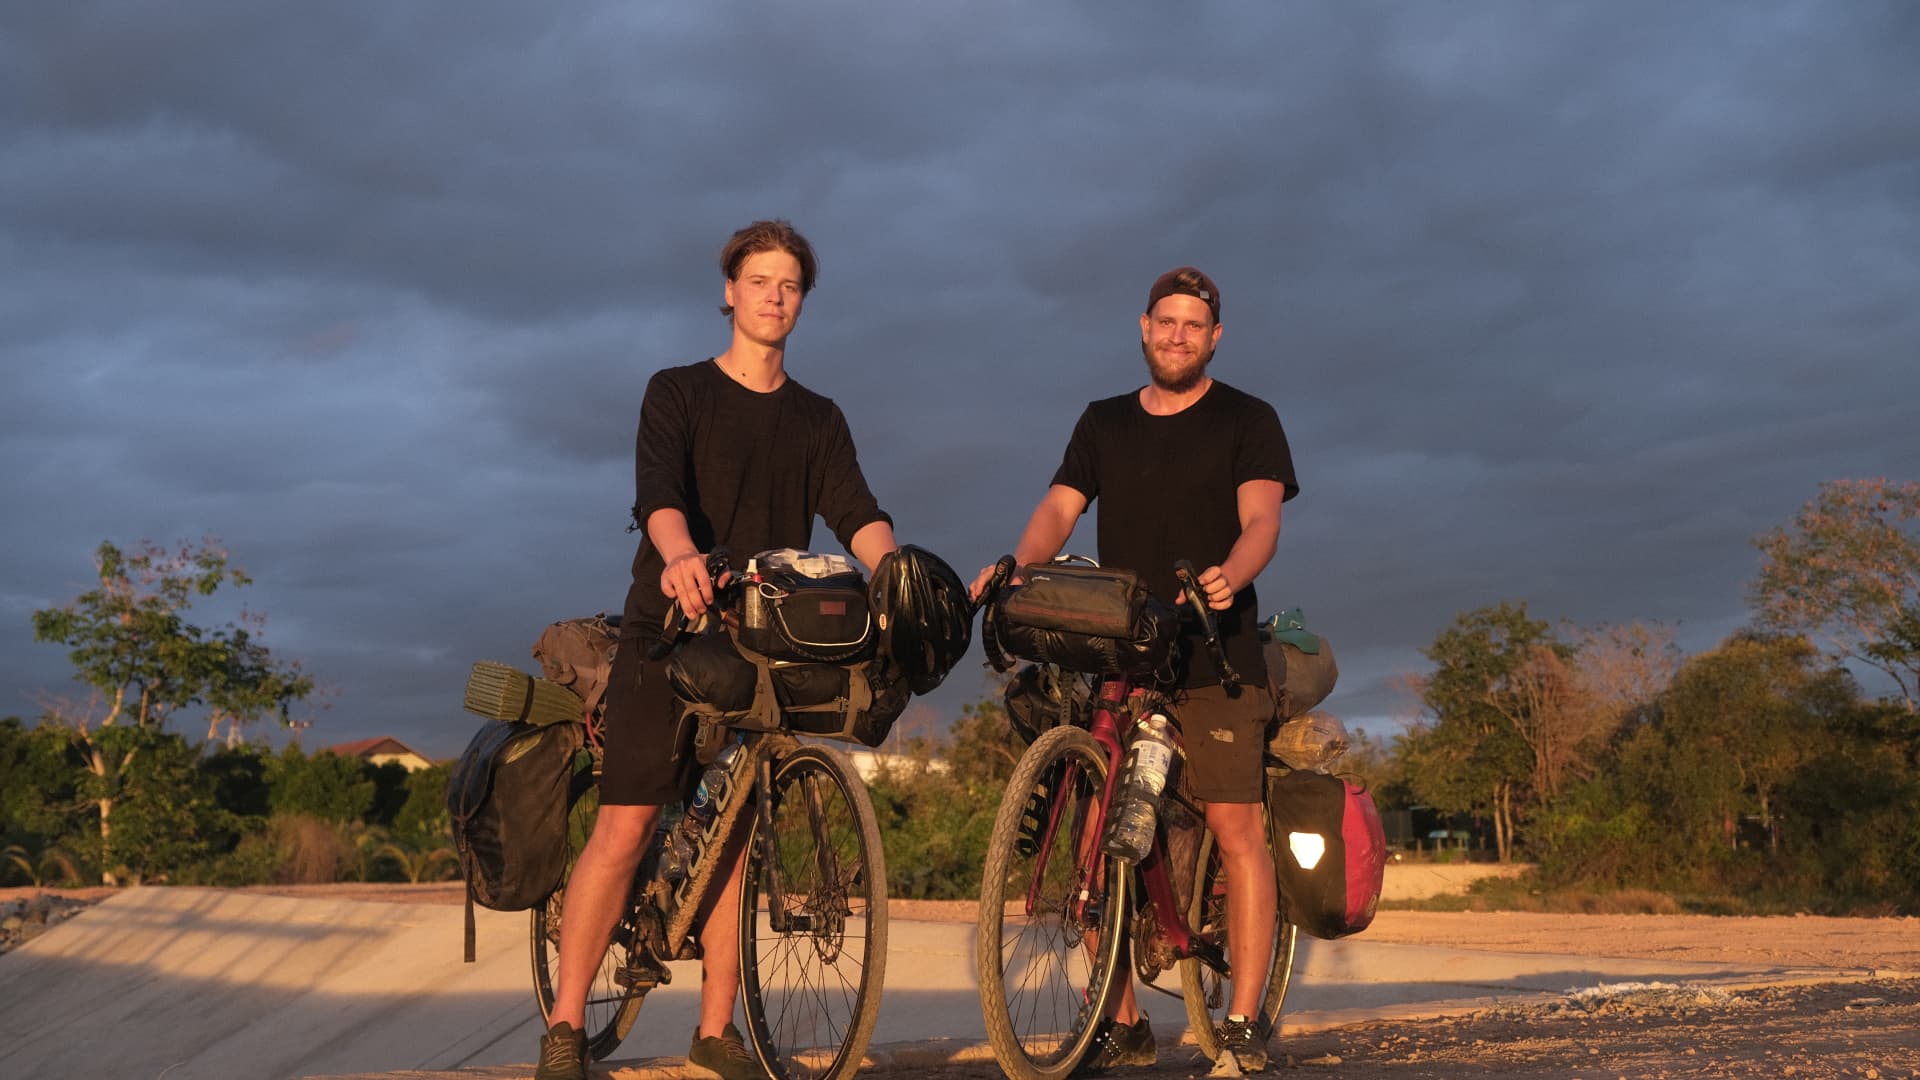 To flee the rat race, this pair cycled 15,000 km alongside the route from Finland to Singapore